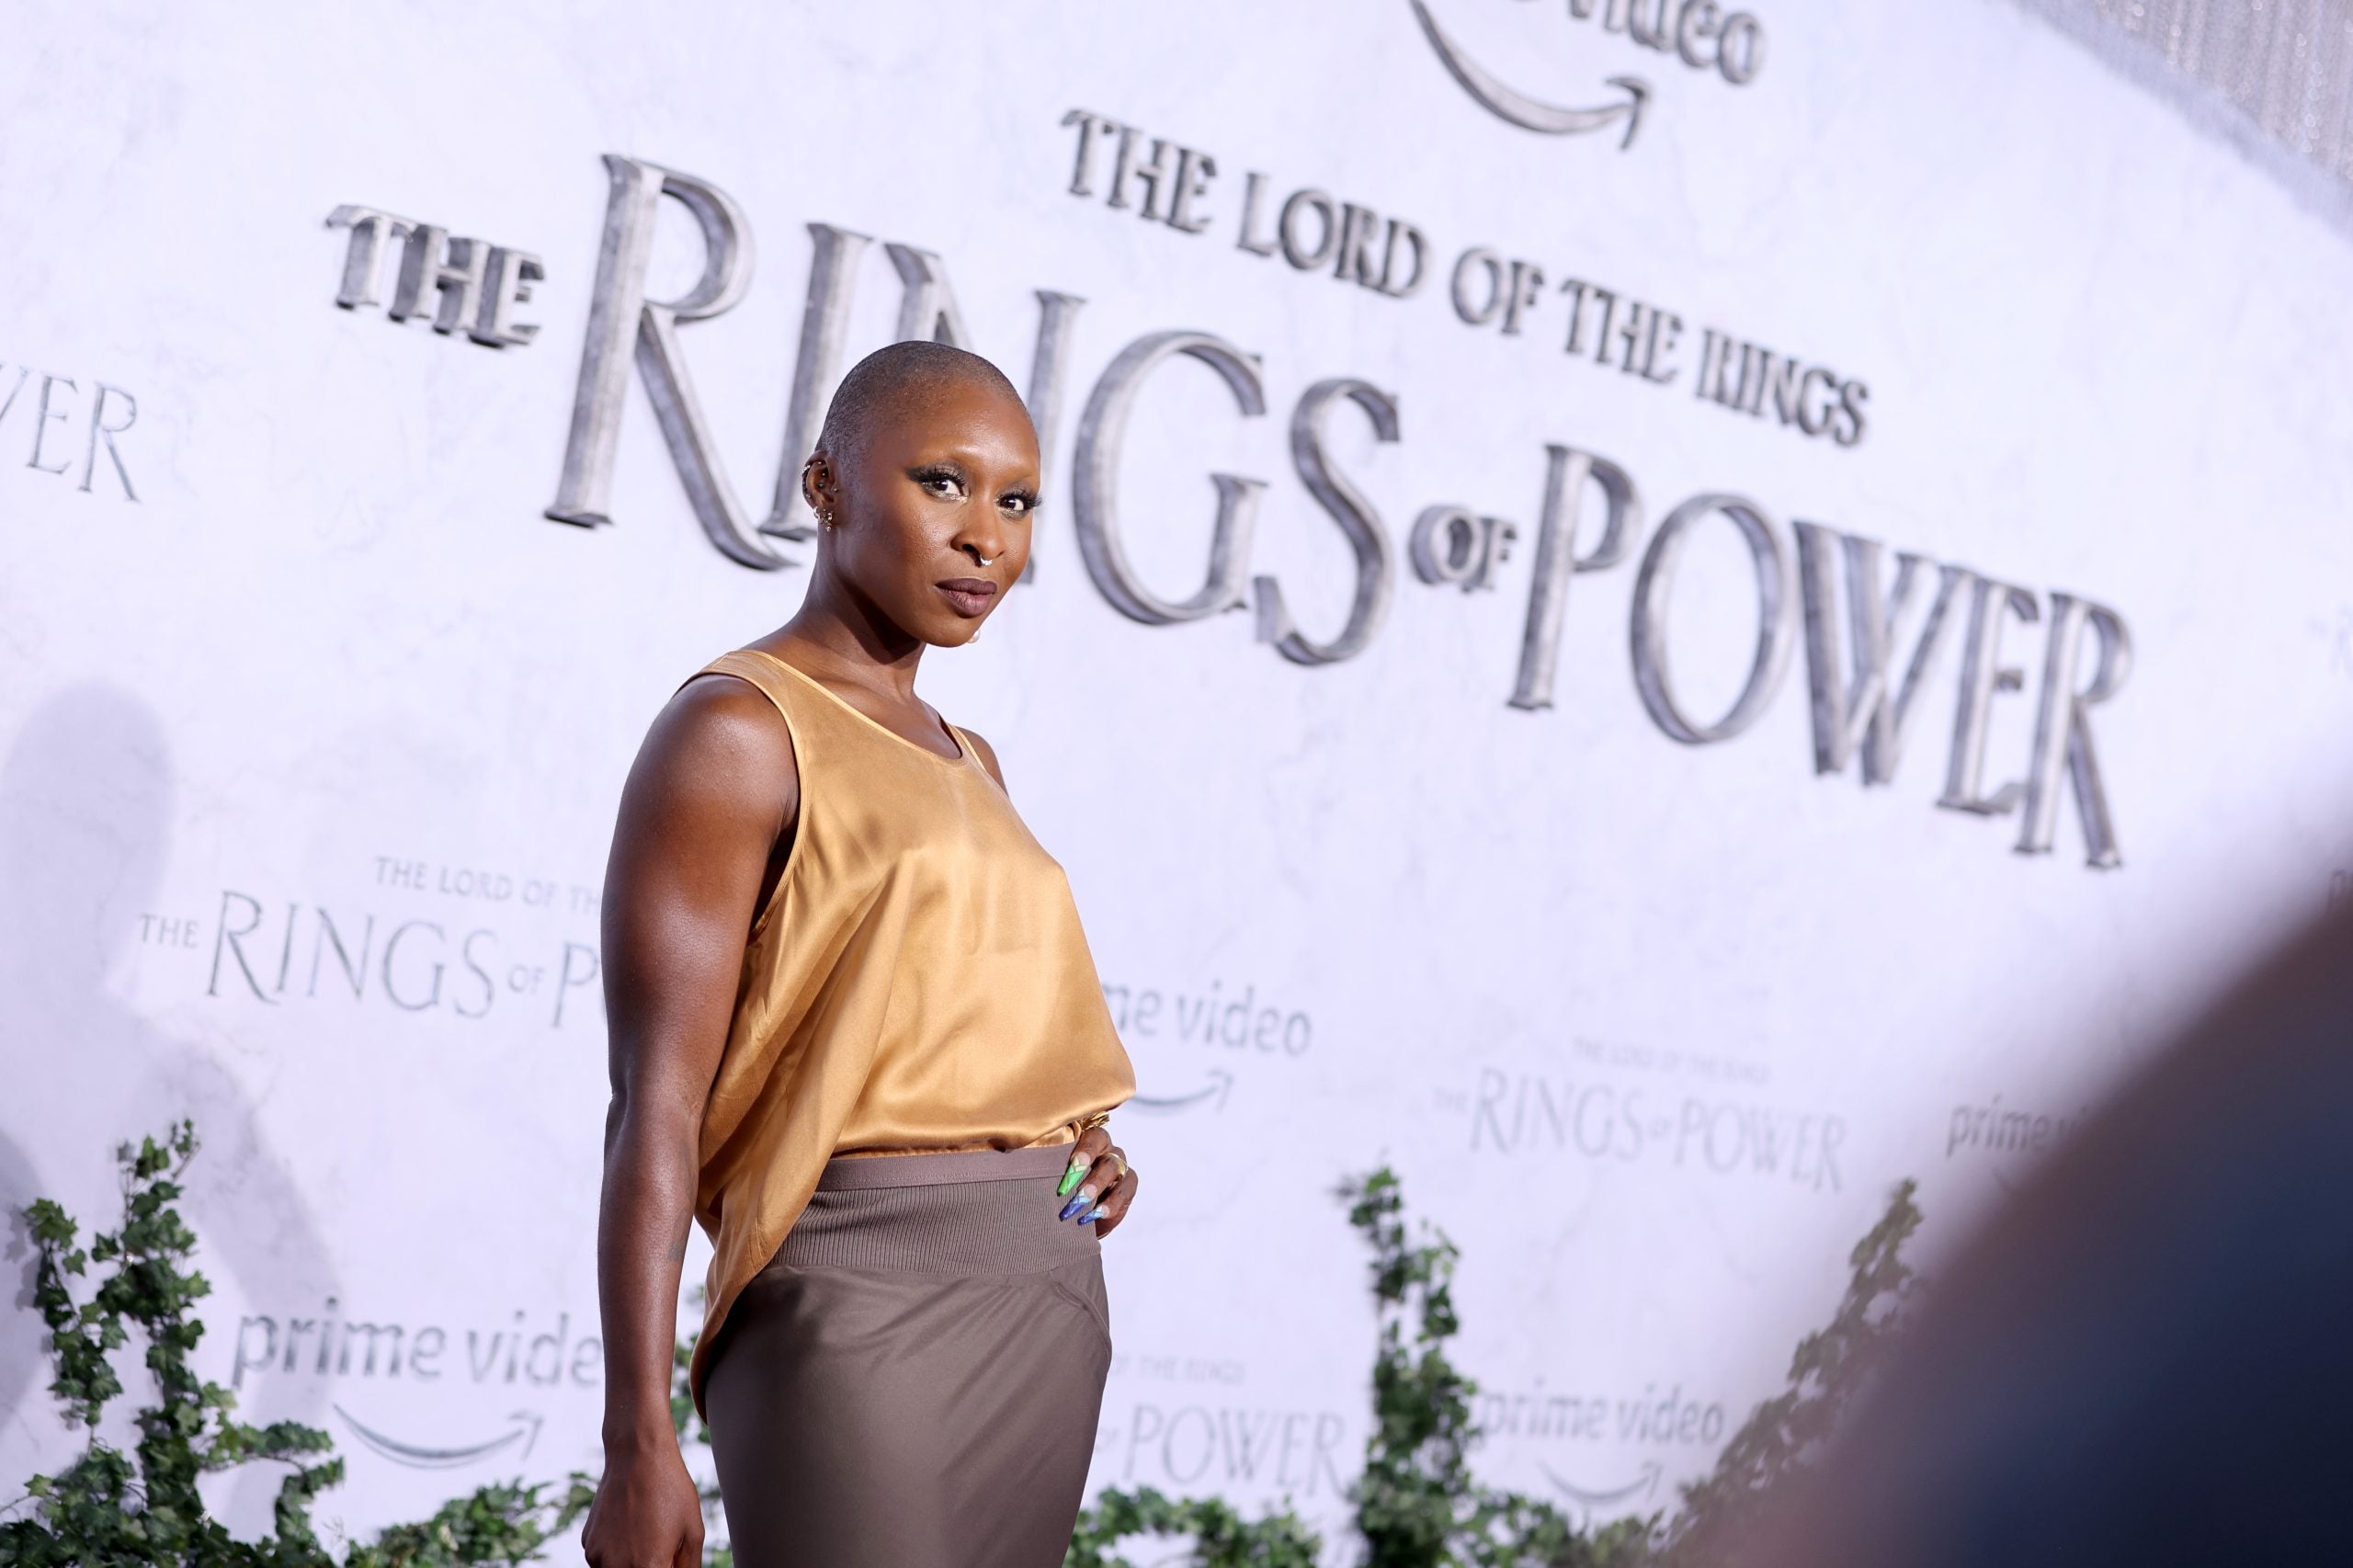 Star Gazing: Celebs Journey To Middle-Earth For Premieres Of 'LOTR: The Rings Of Power'